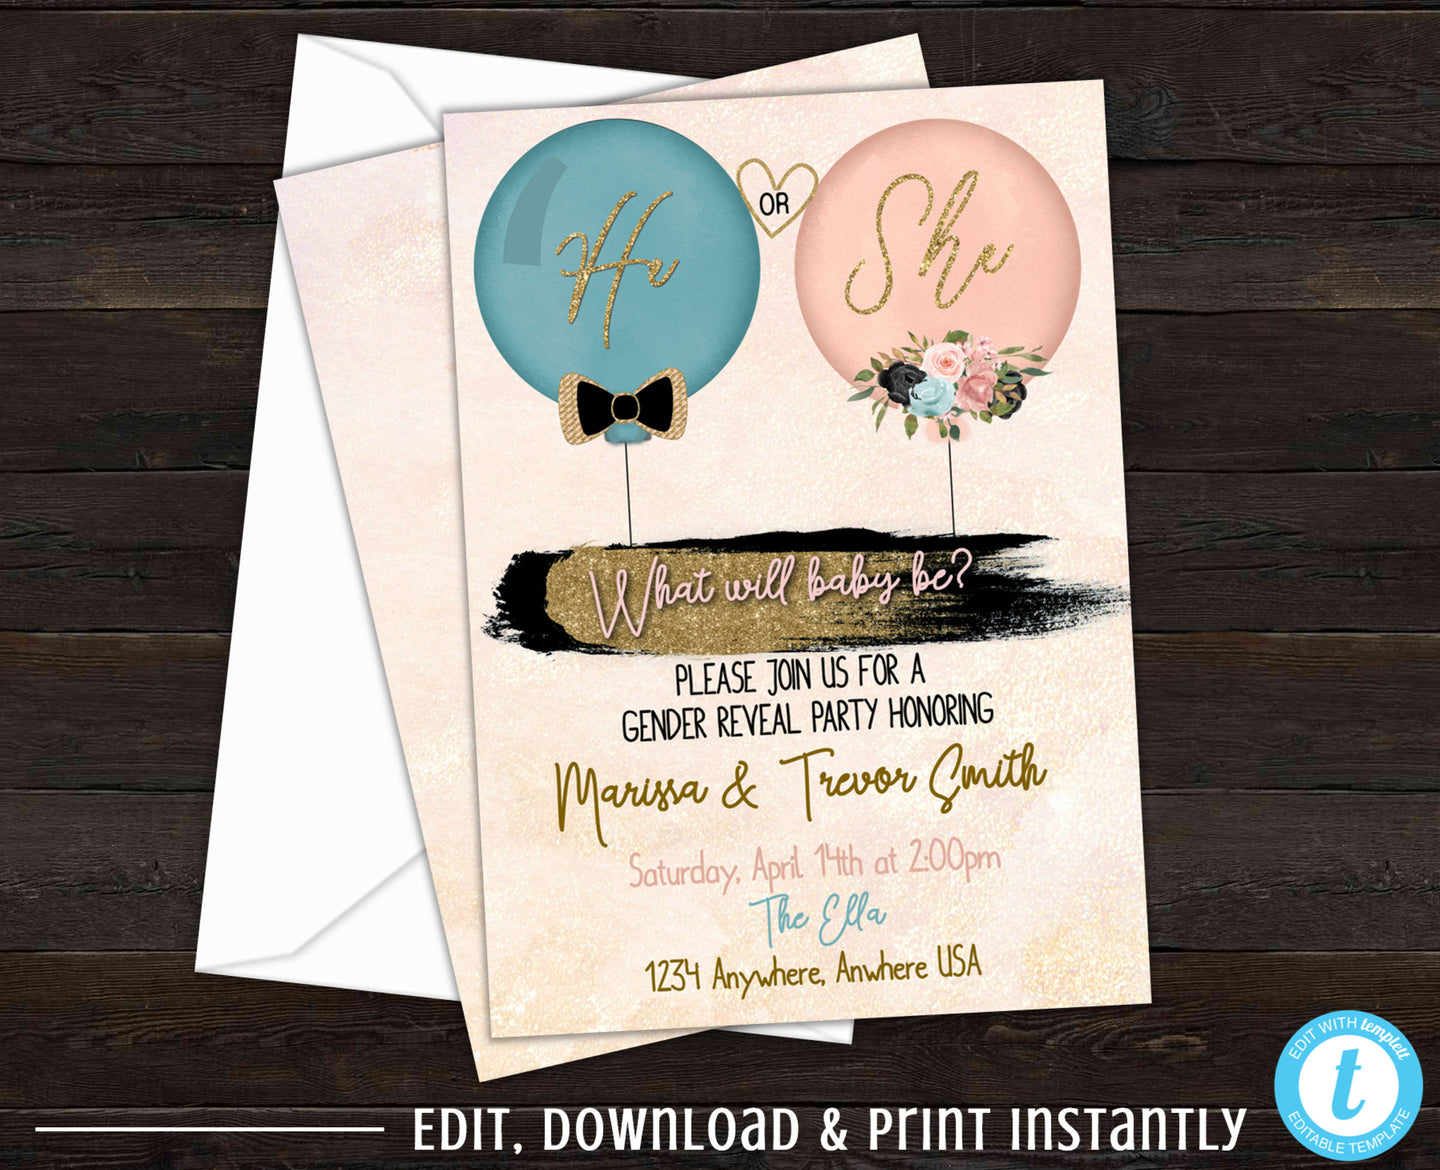 Editable Gender Reveal Invitation, Balloon Baby Shower Invite, Gender Reveal Party, Blue or Pink, He or She, Boy or Girl, Instant Download